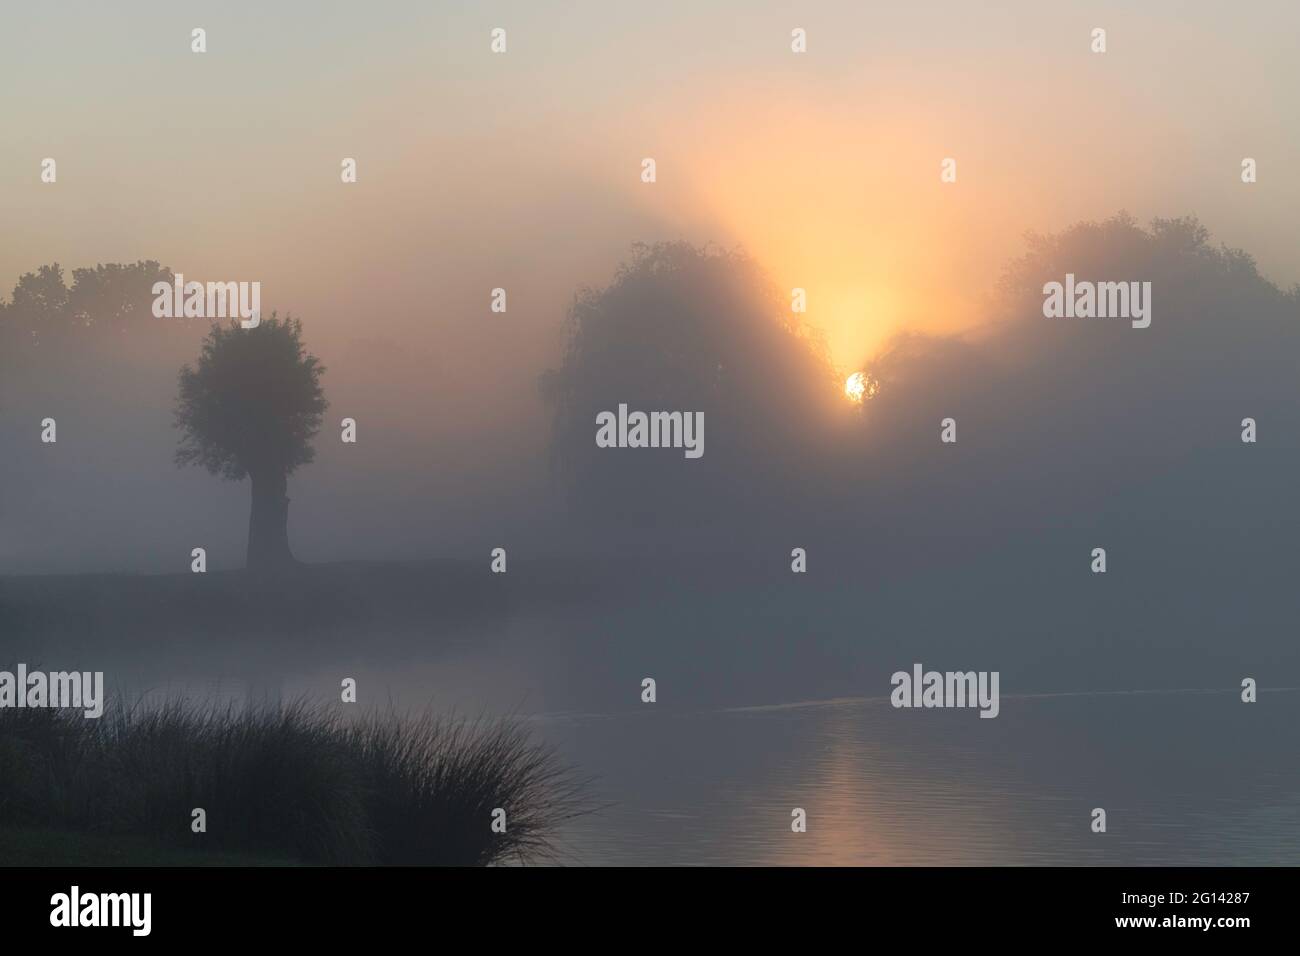 The sun rises over trees on a very misty morning by a tranquil pond Stock Photo